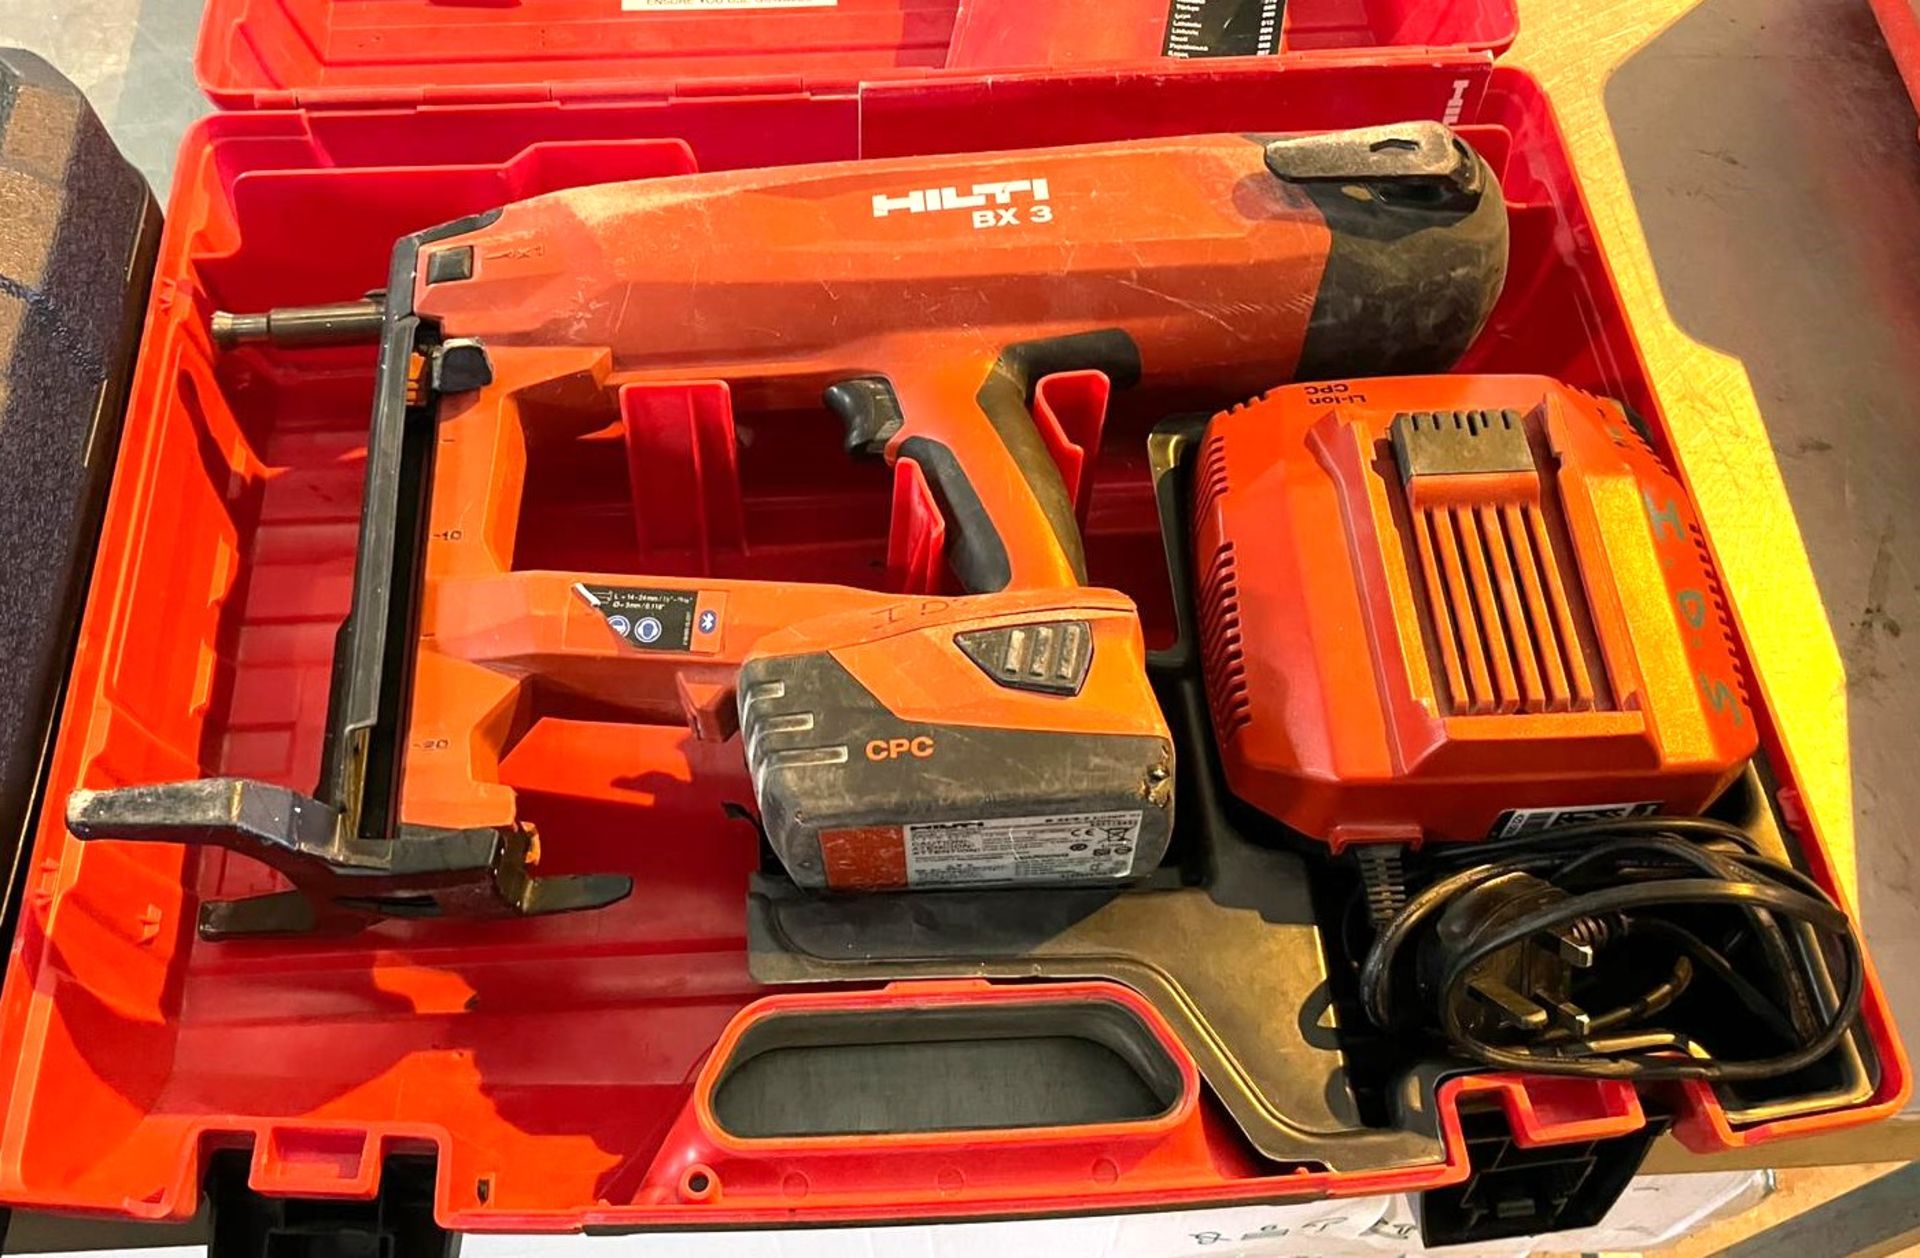 1 x Hilti BX3 Cordless Nail Gun Fastening Tool - Includes Case, Battery and Charger - RRP £3,400 - Bild 6 aus 7